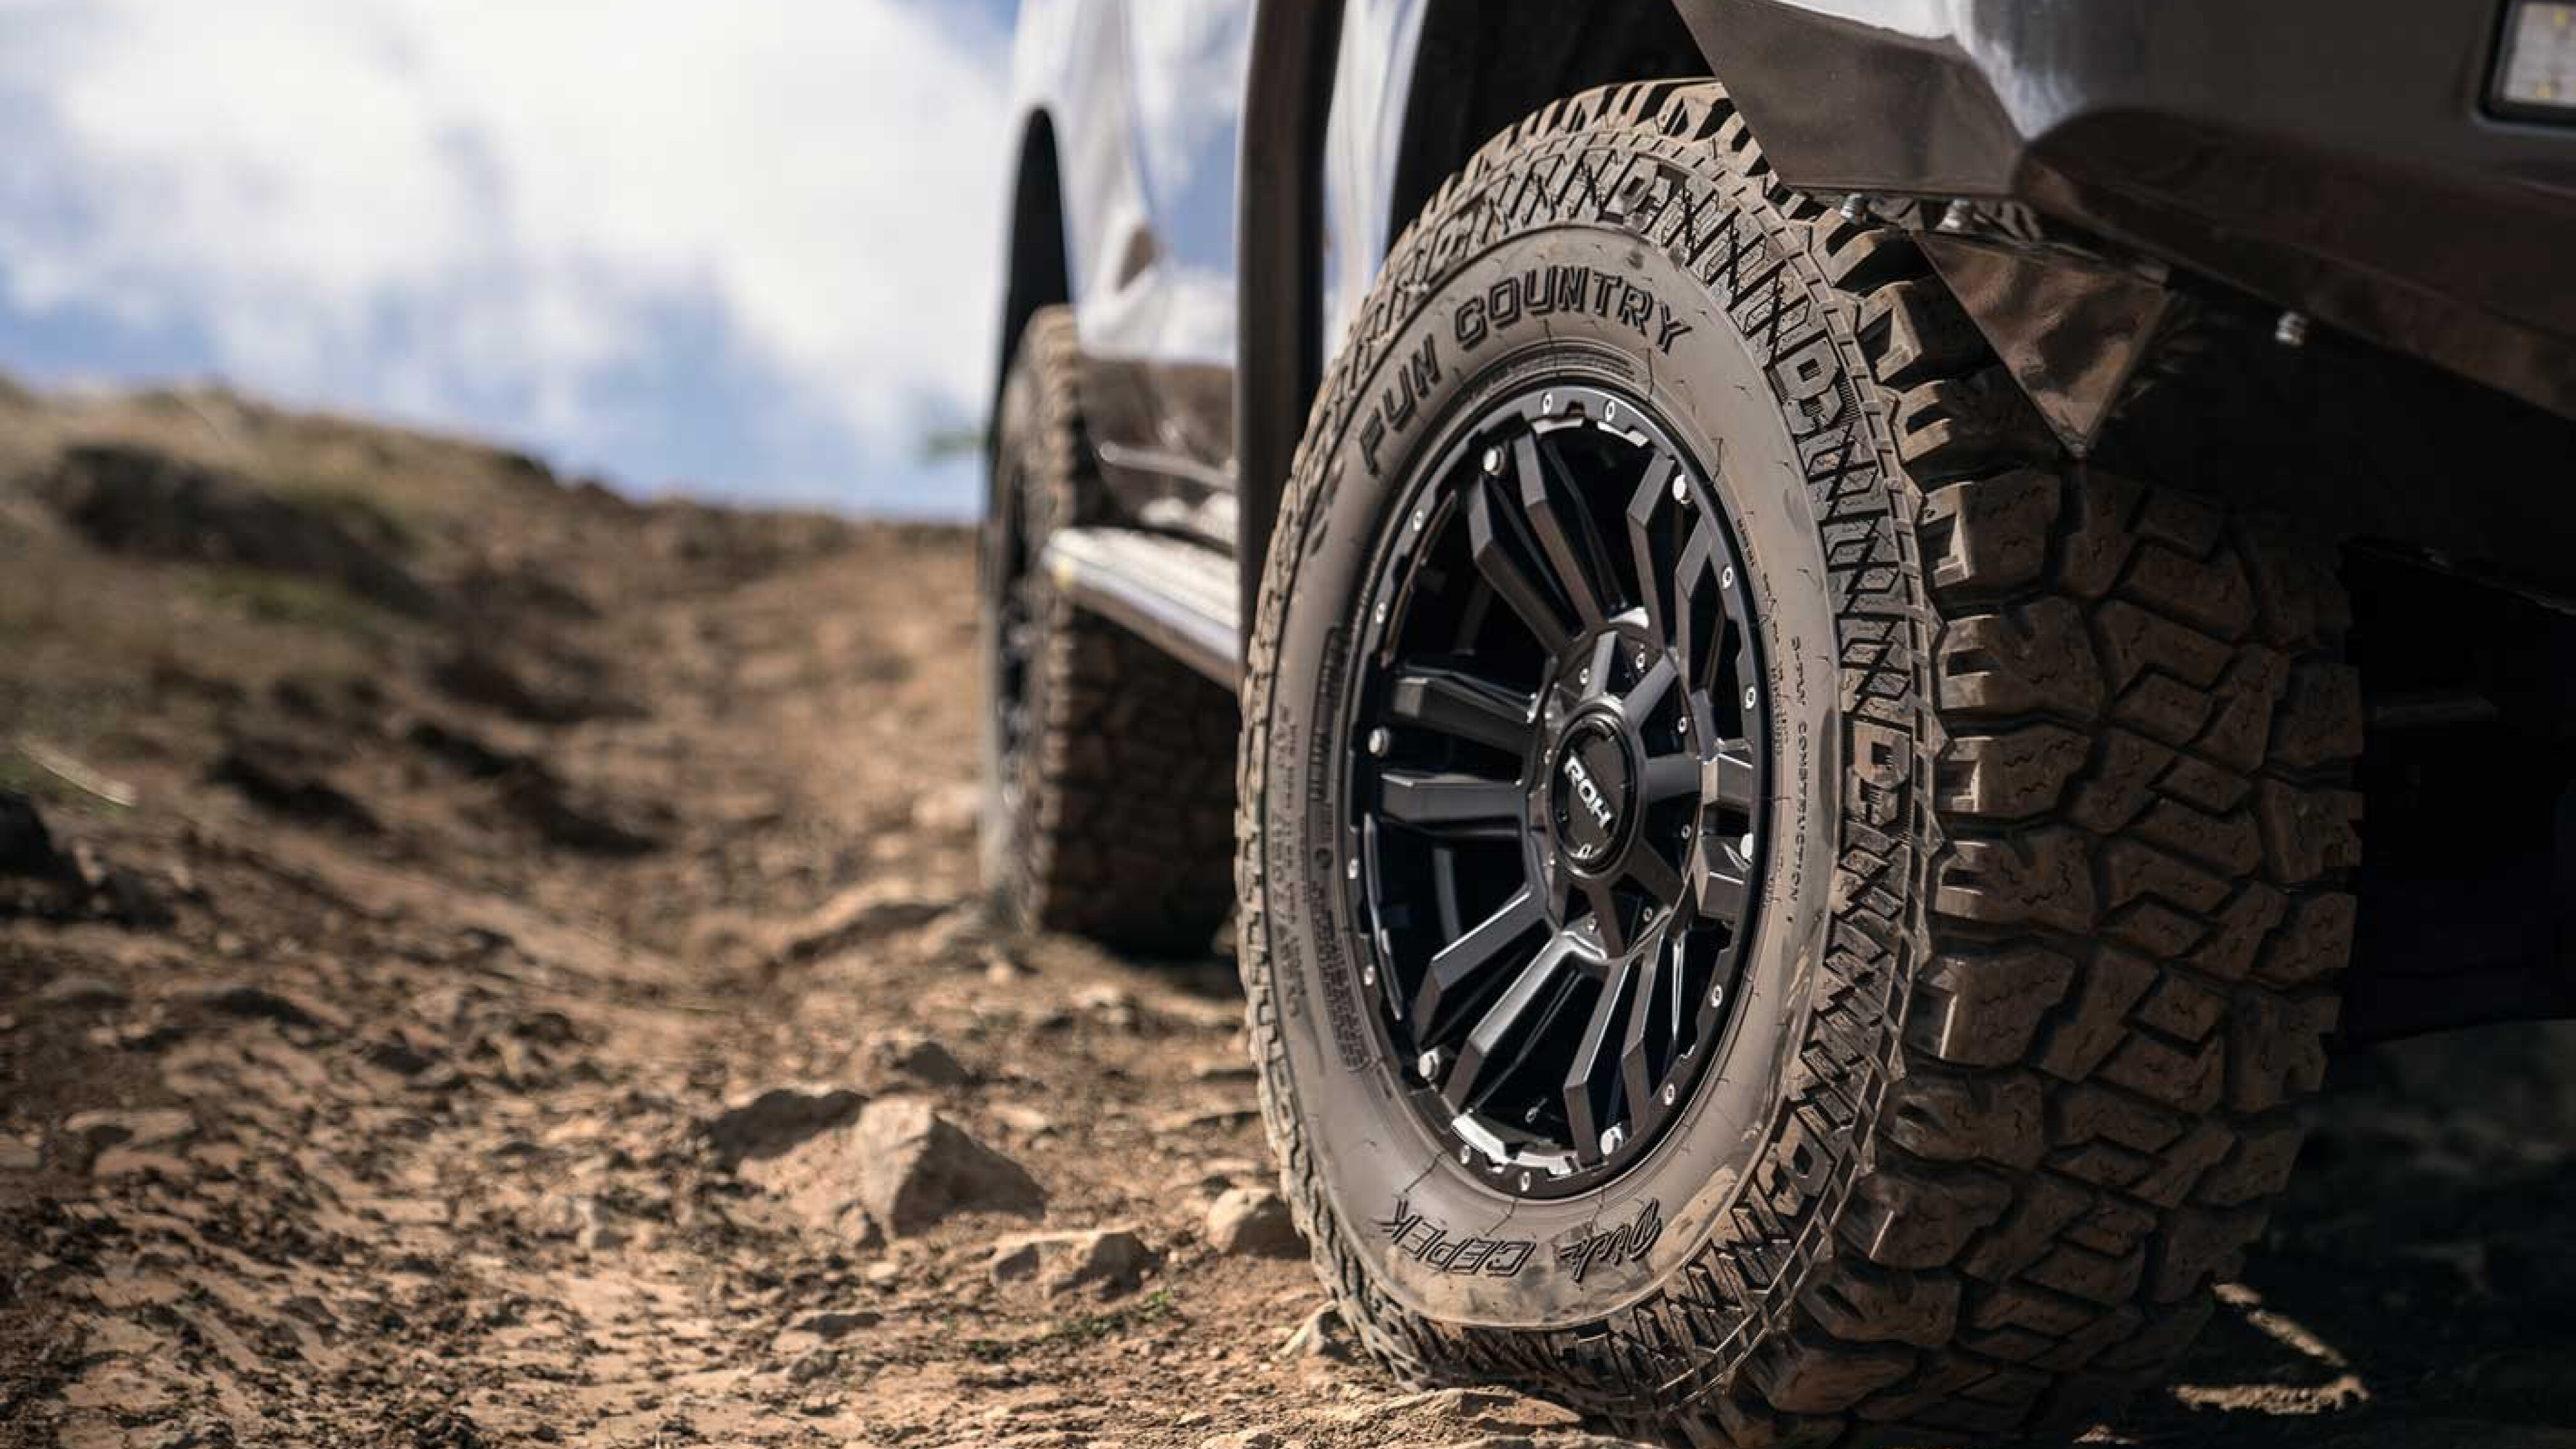 Street, Sport, and Offroad Wheels